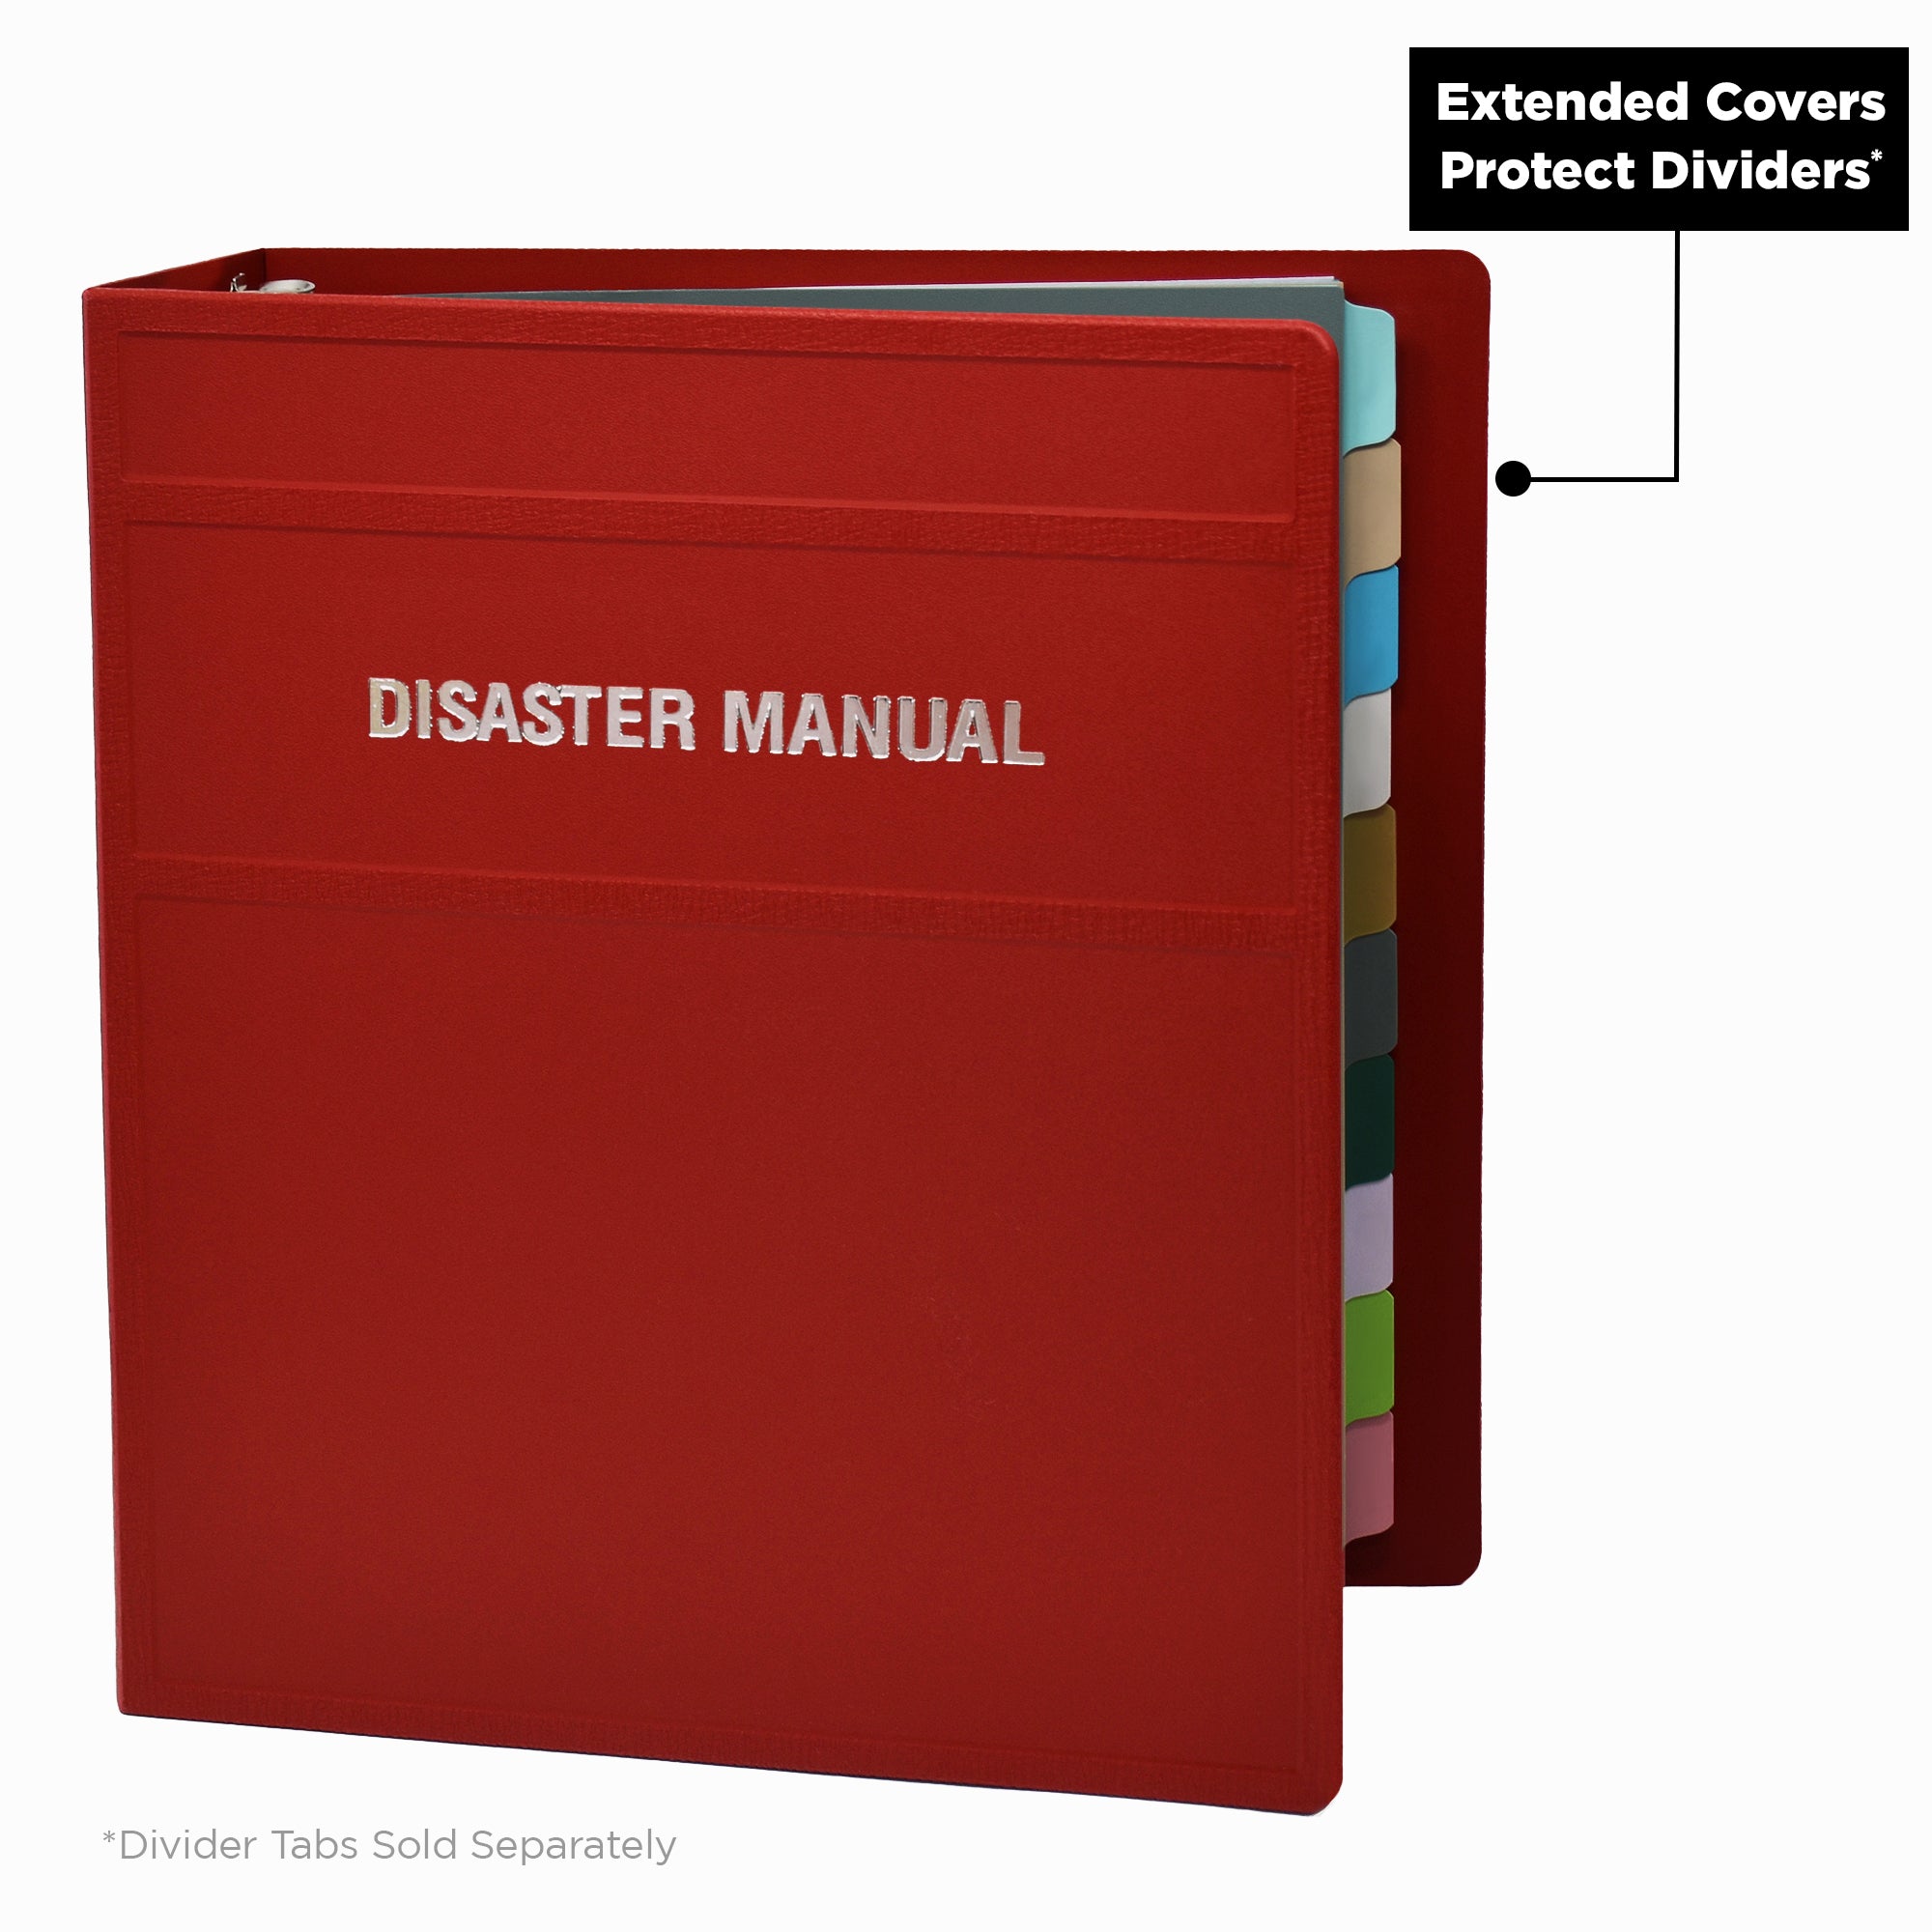 Heavy Duty 3-Ring Binder for Disaster Manuals - Side Opening